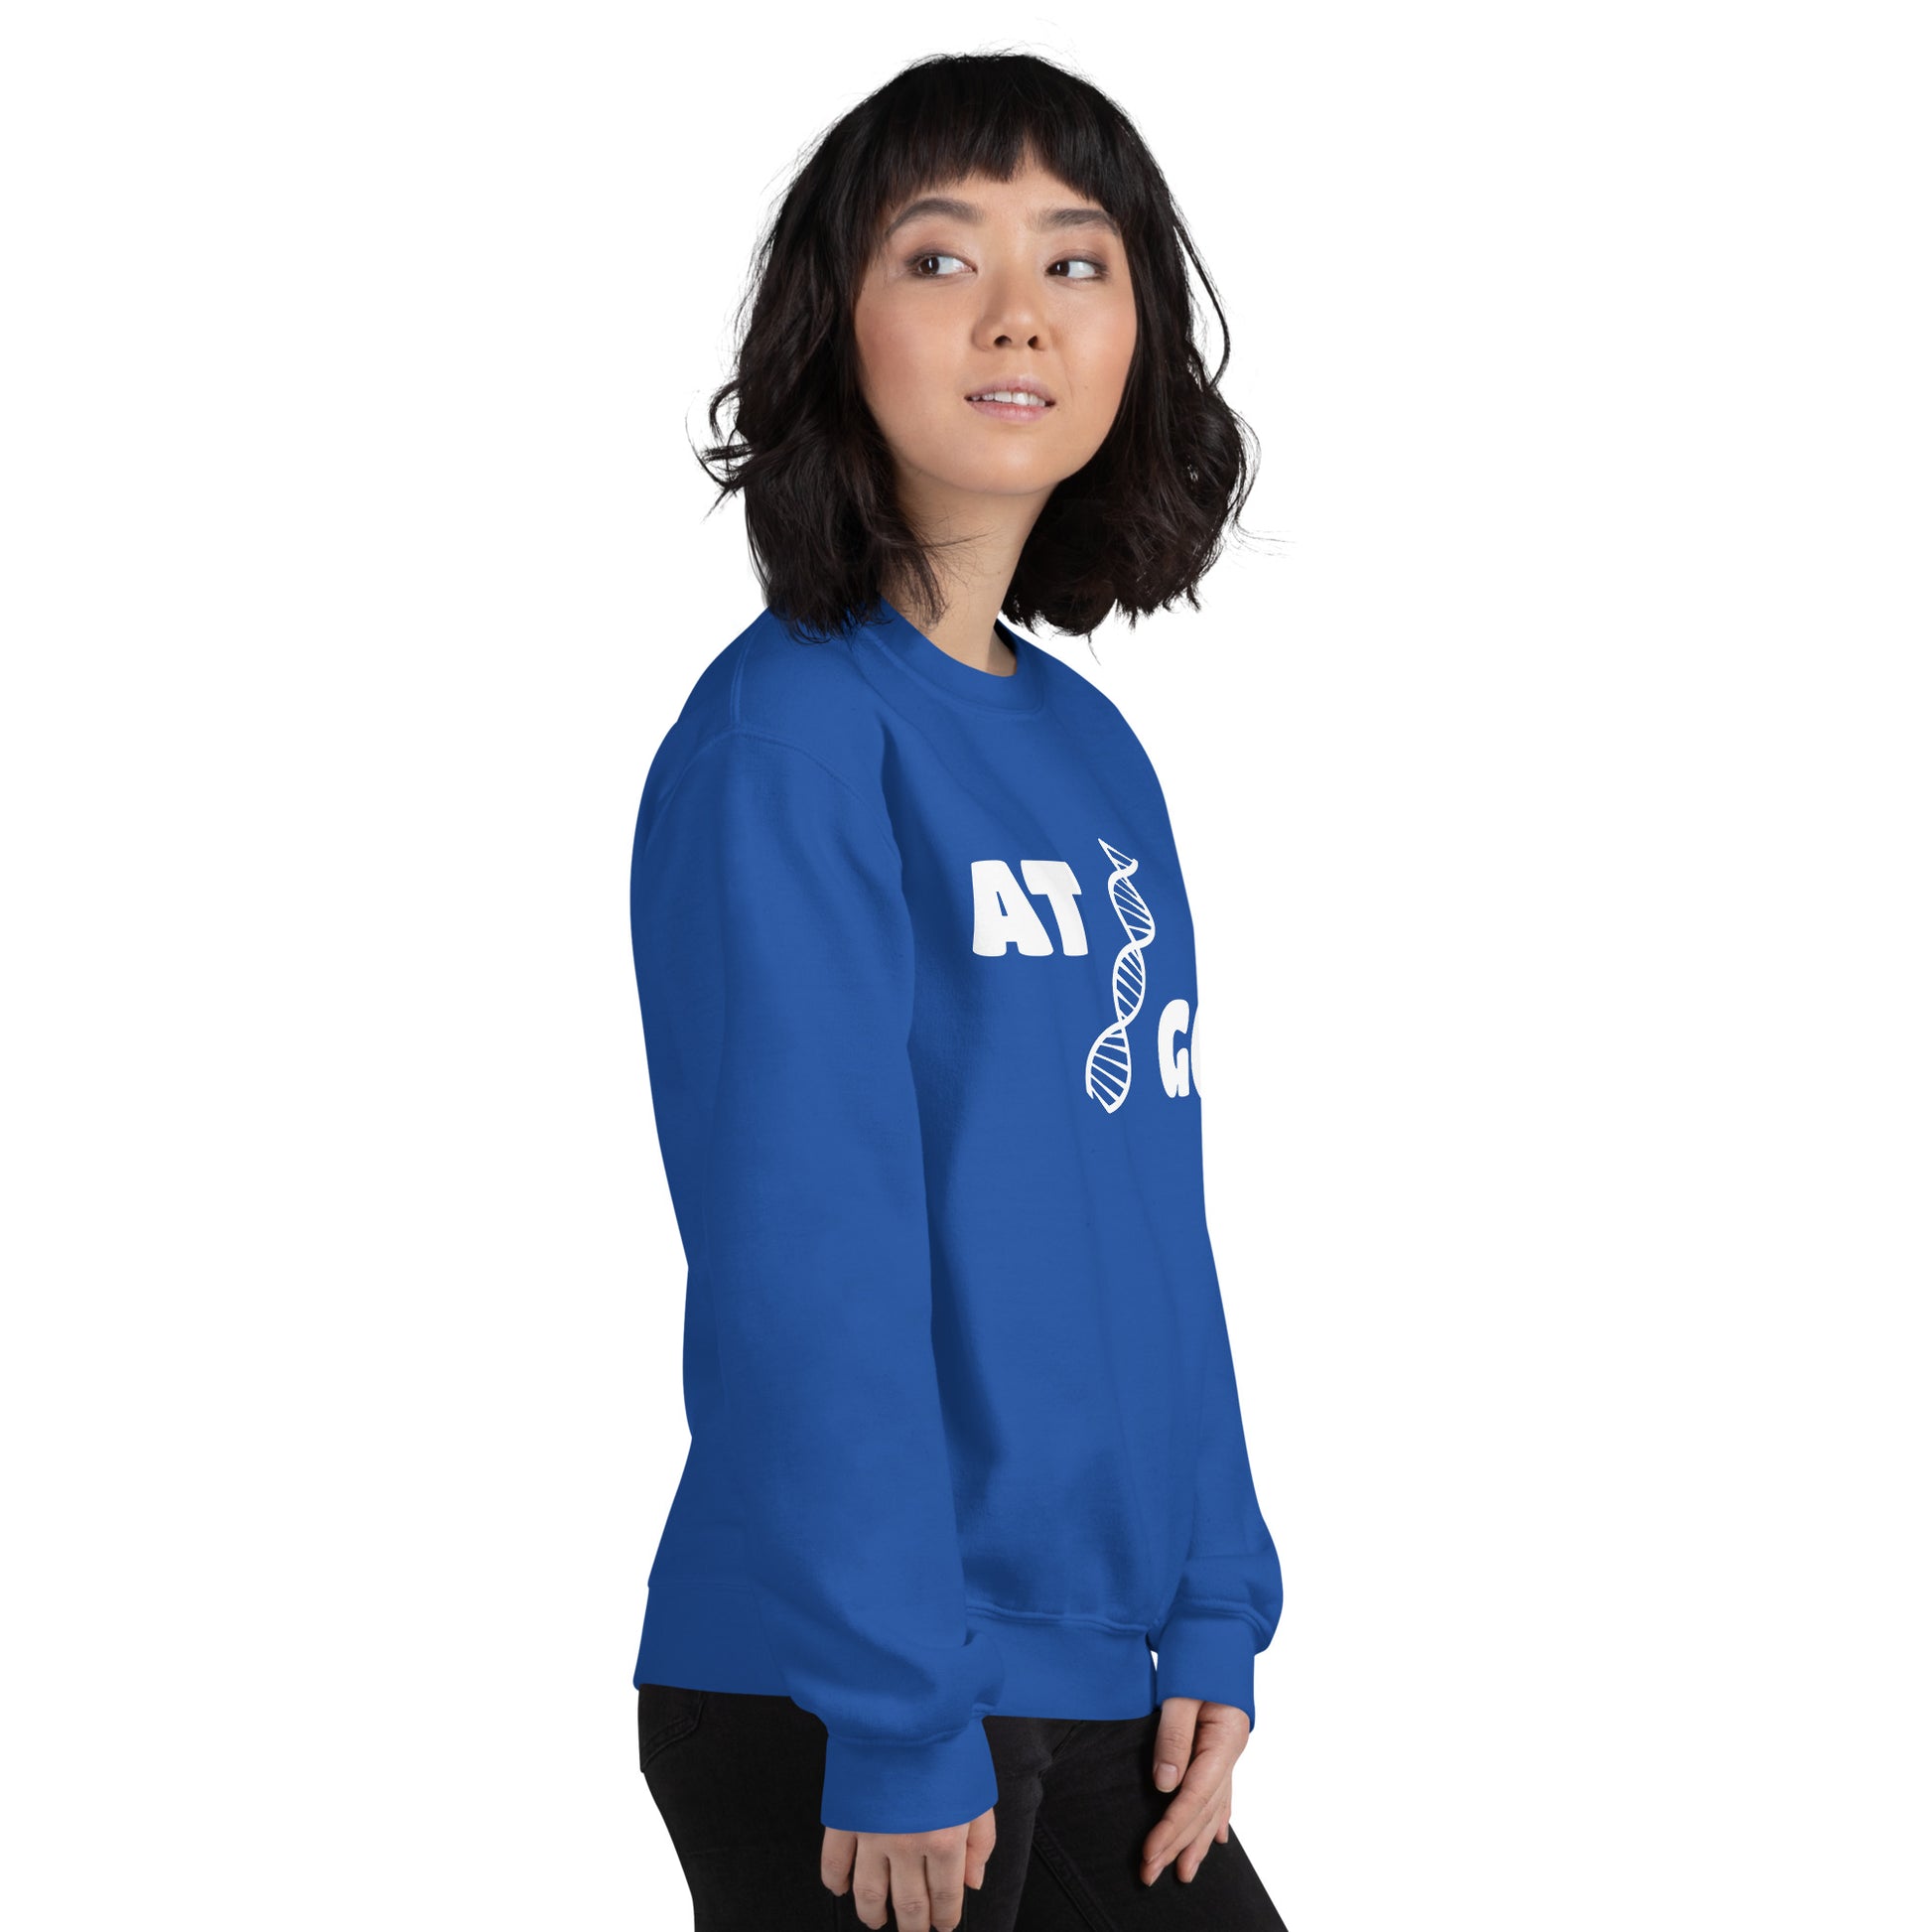 Women with royal blue sweatshirt with image of a DNA string and the text "ATGC"